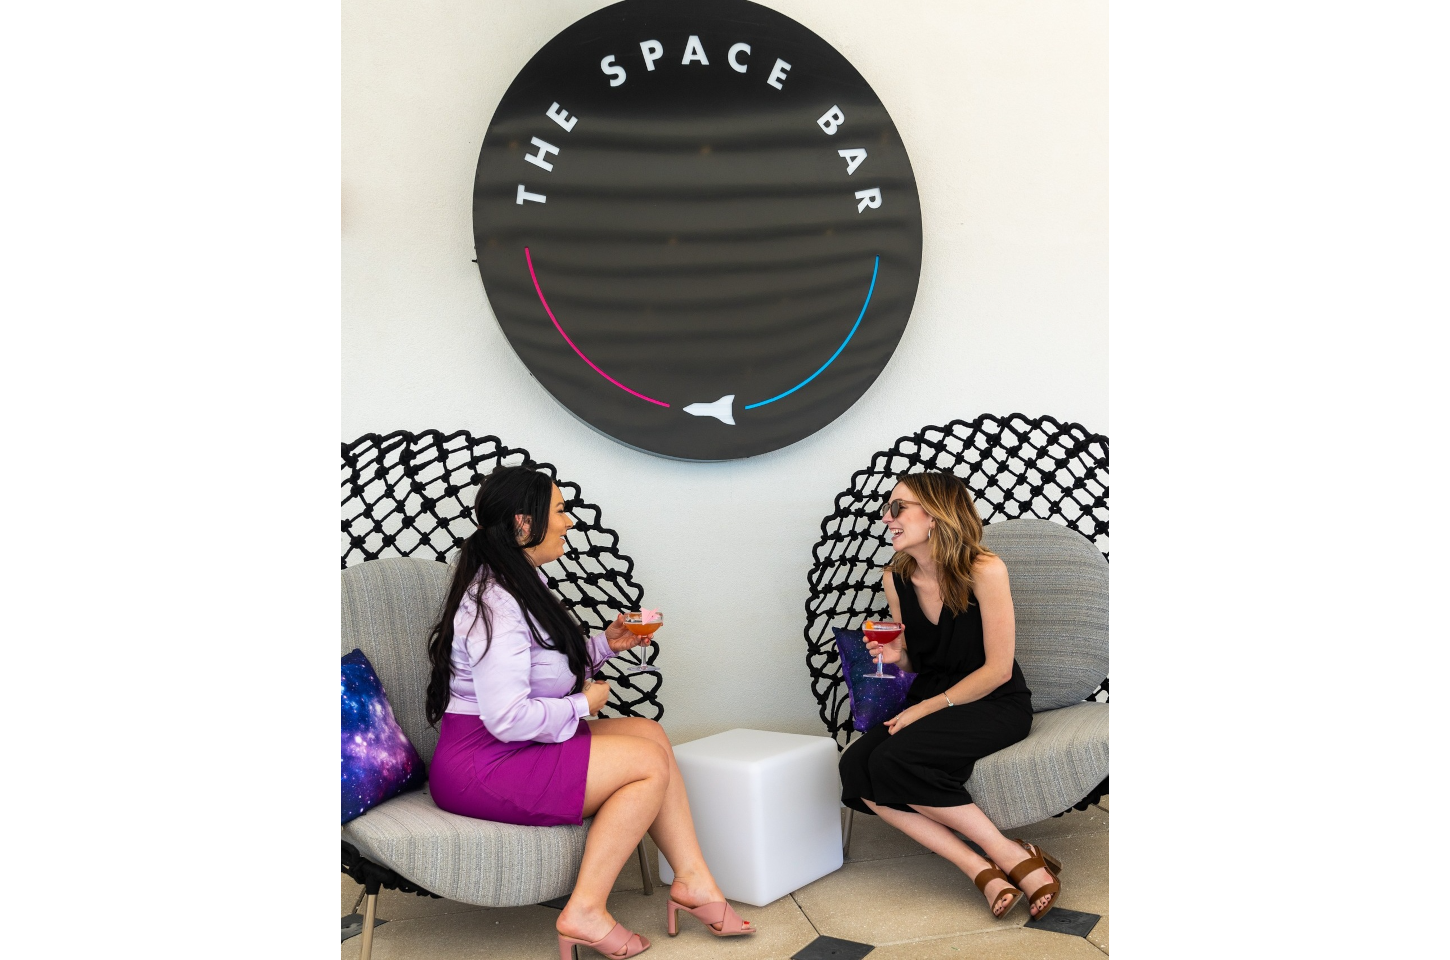 Women have cocktails at The Space Bar in Titusville